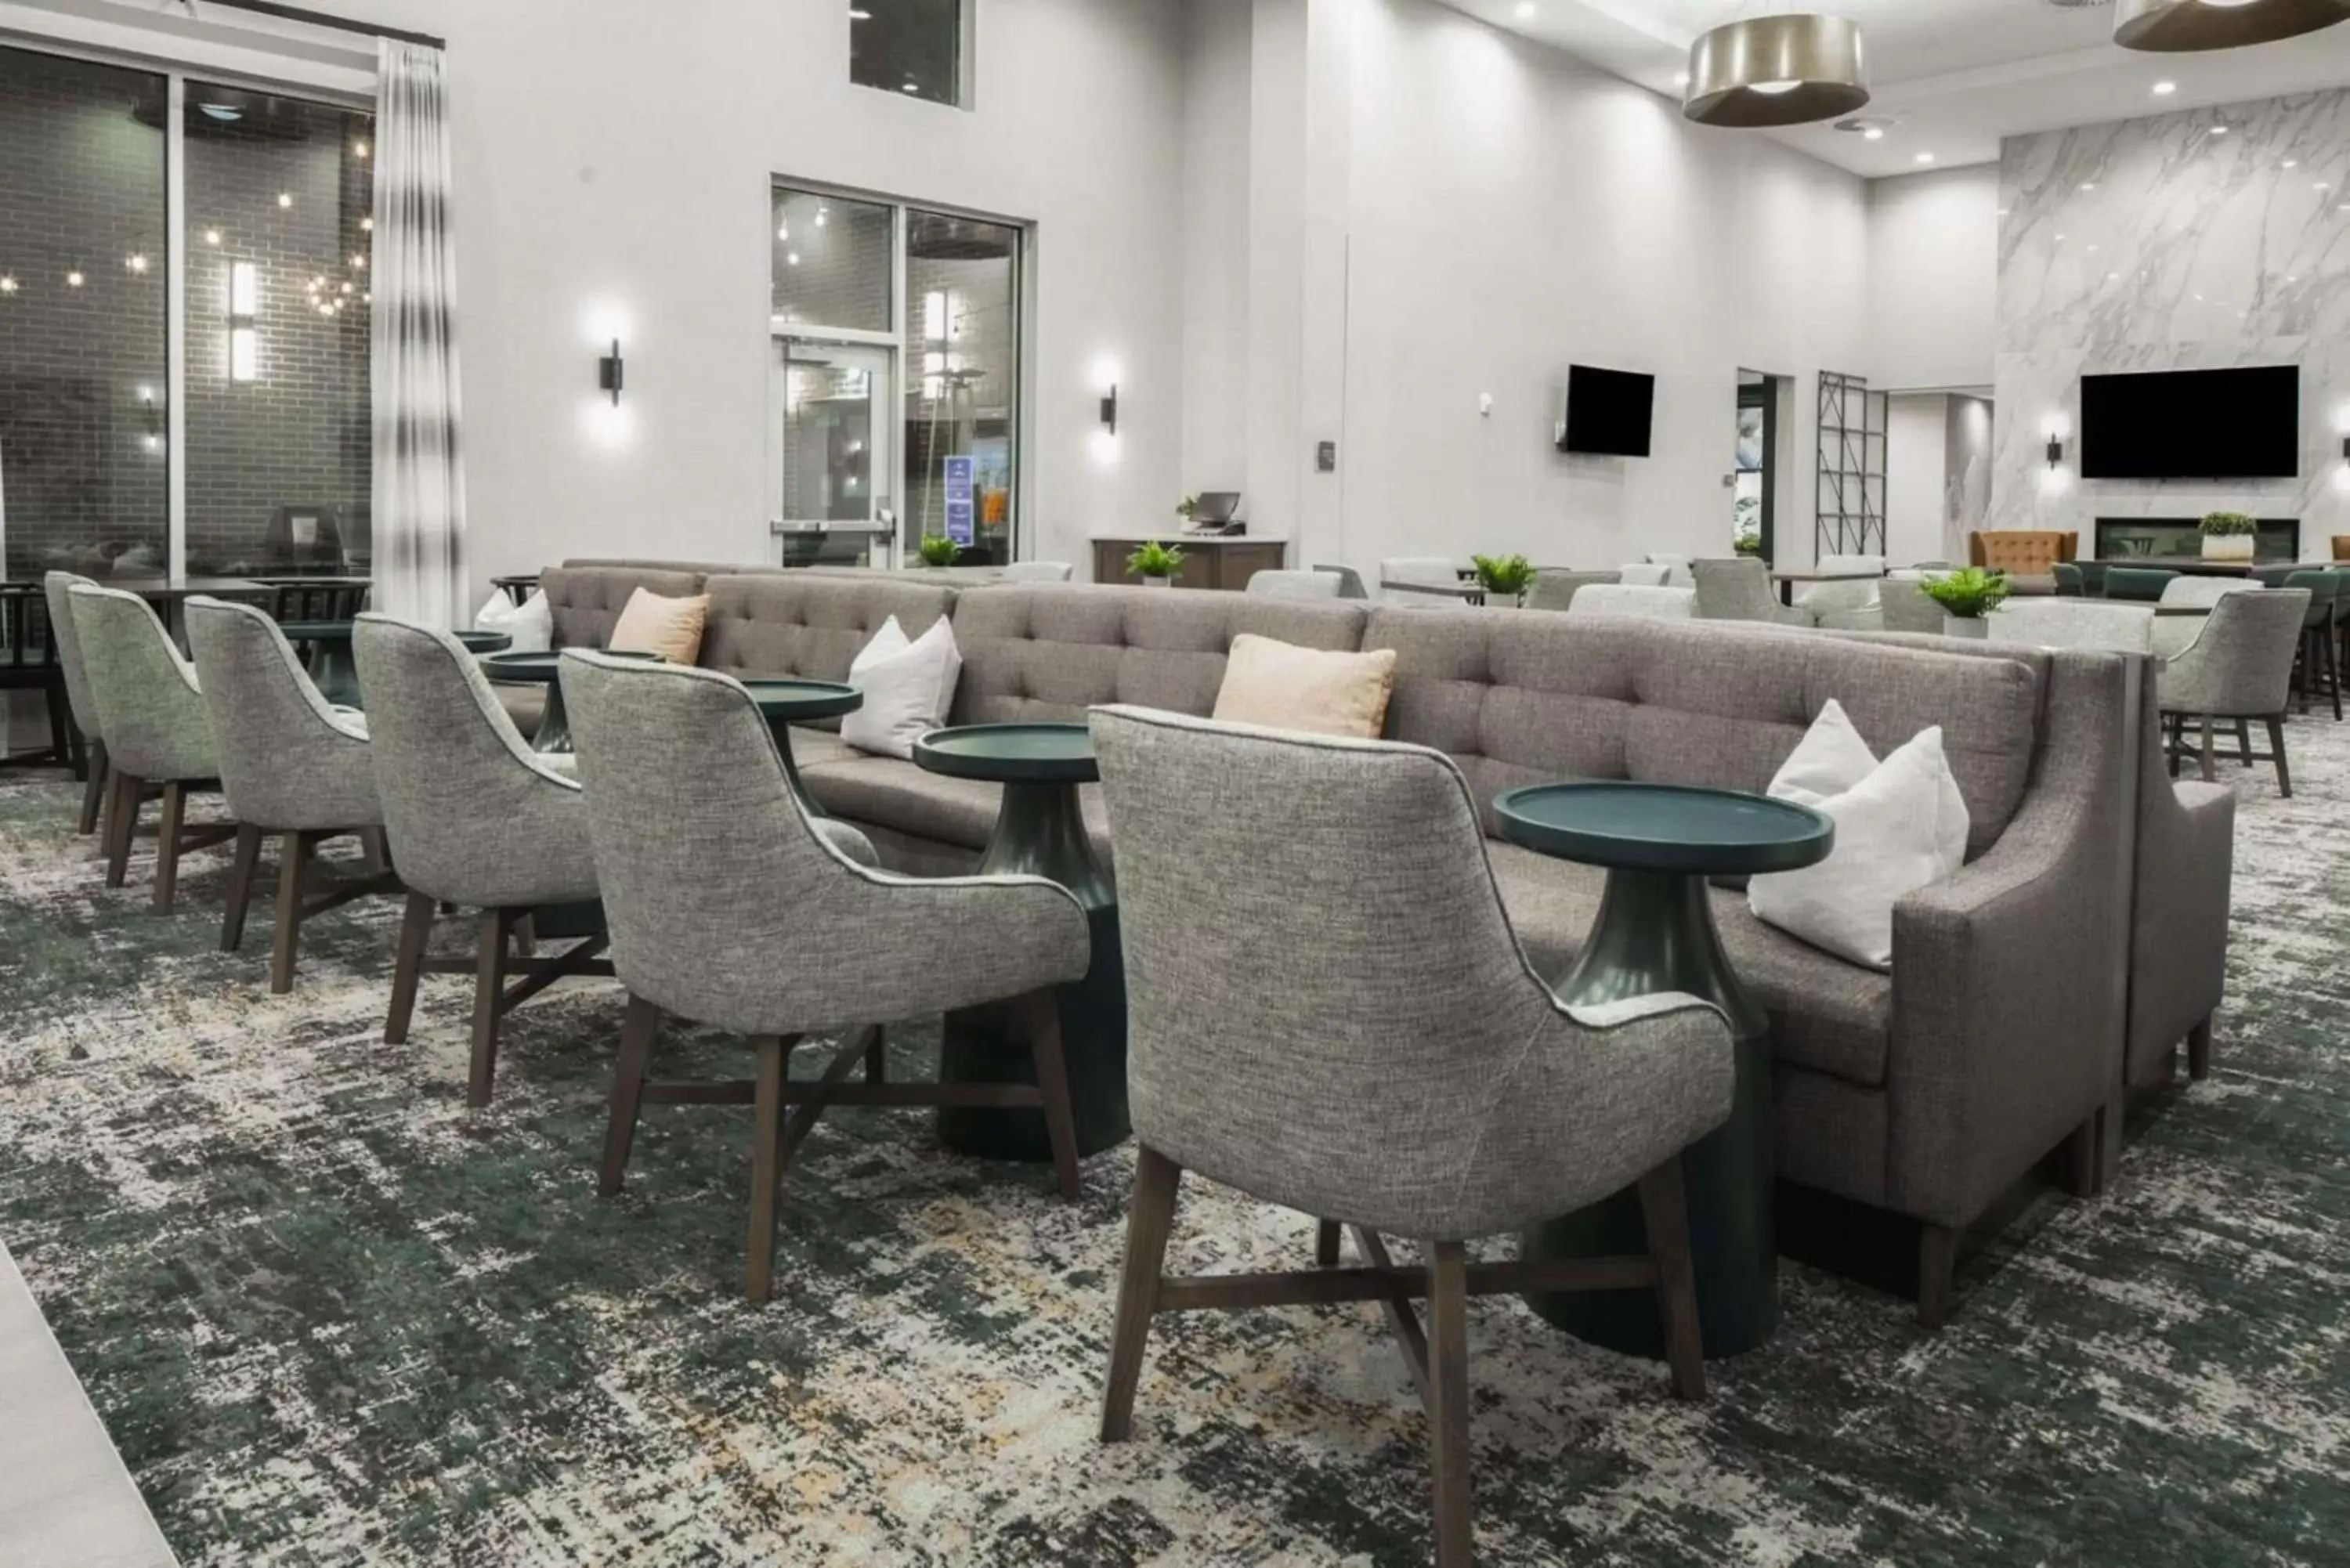 Dining area, Lounge/Bar in Homewood Suites by Hilton DFW Airport South, TX